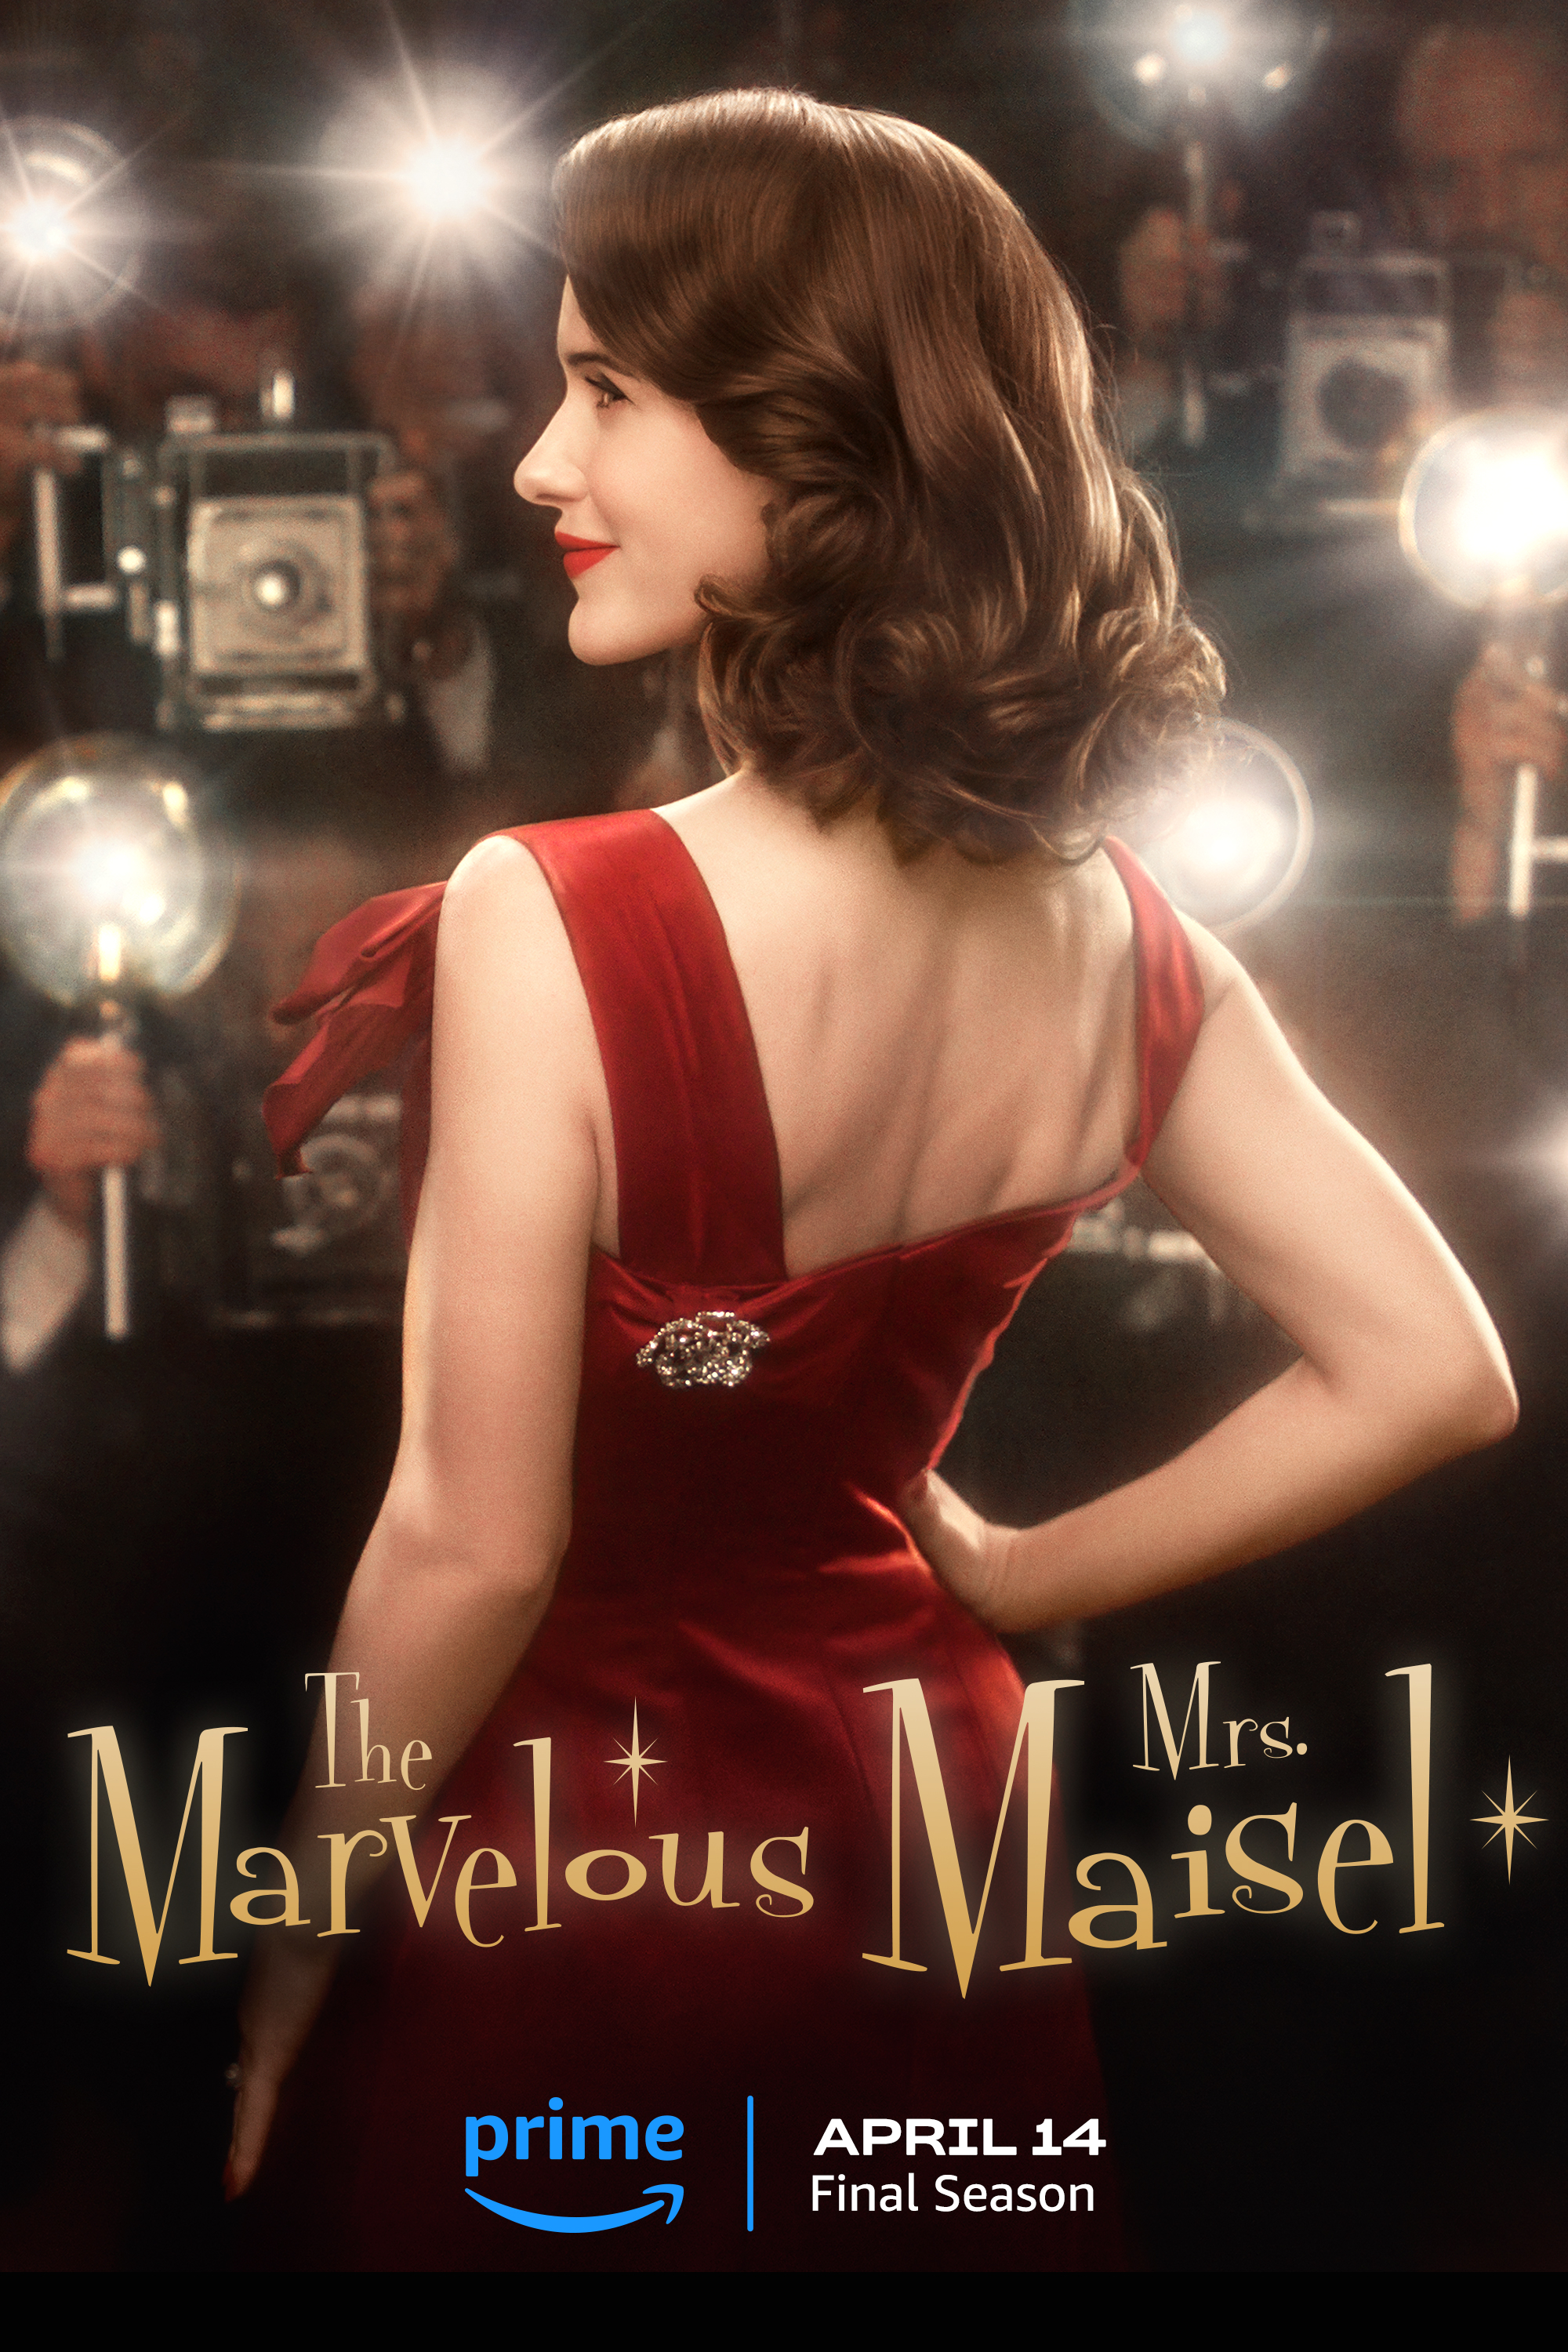 The Marvelous Mrs. Maisel comedy web series